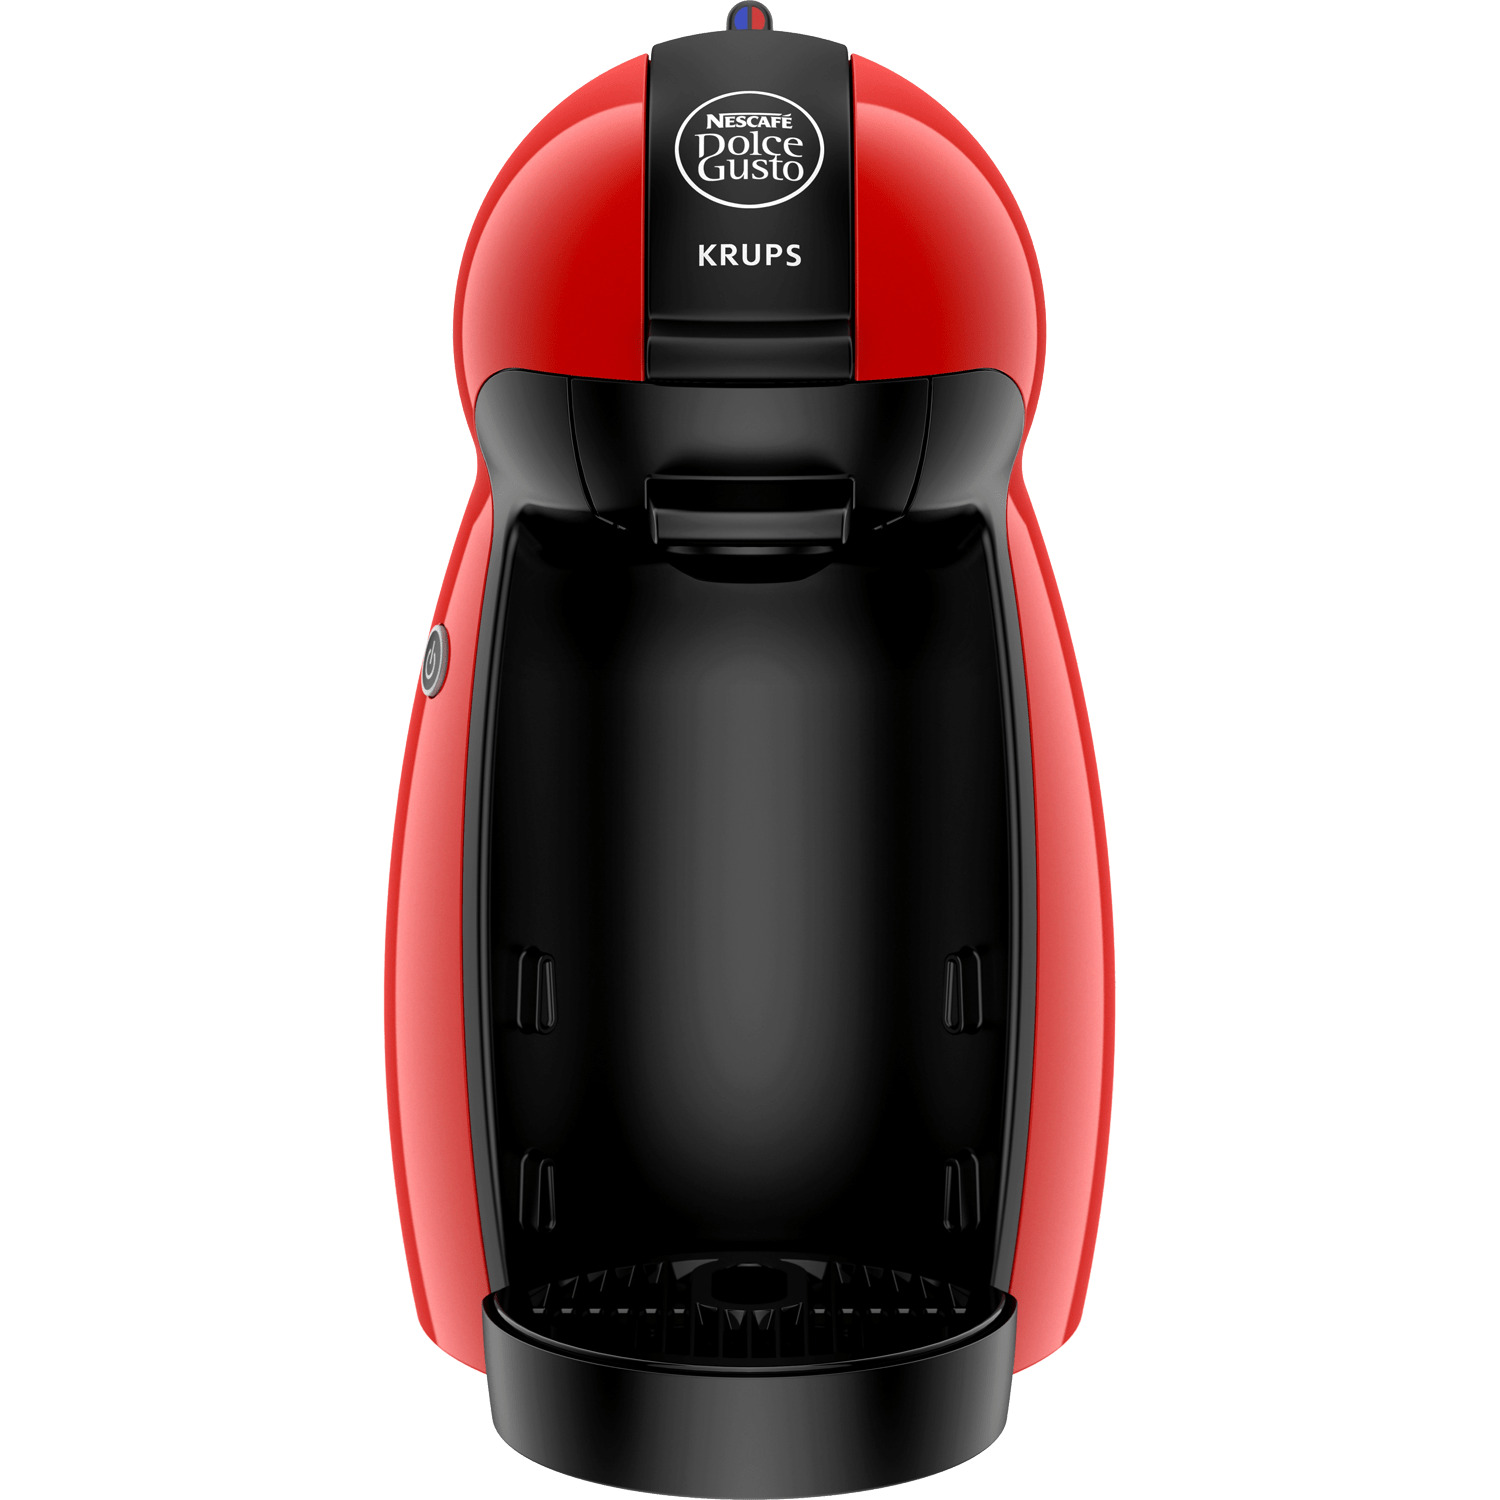 Krups Dolce Gusto Coffee Machine PNG icons